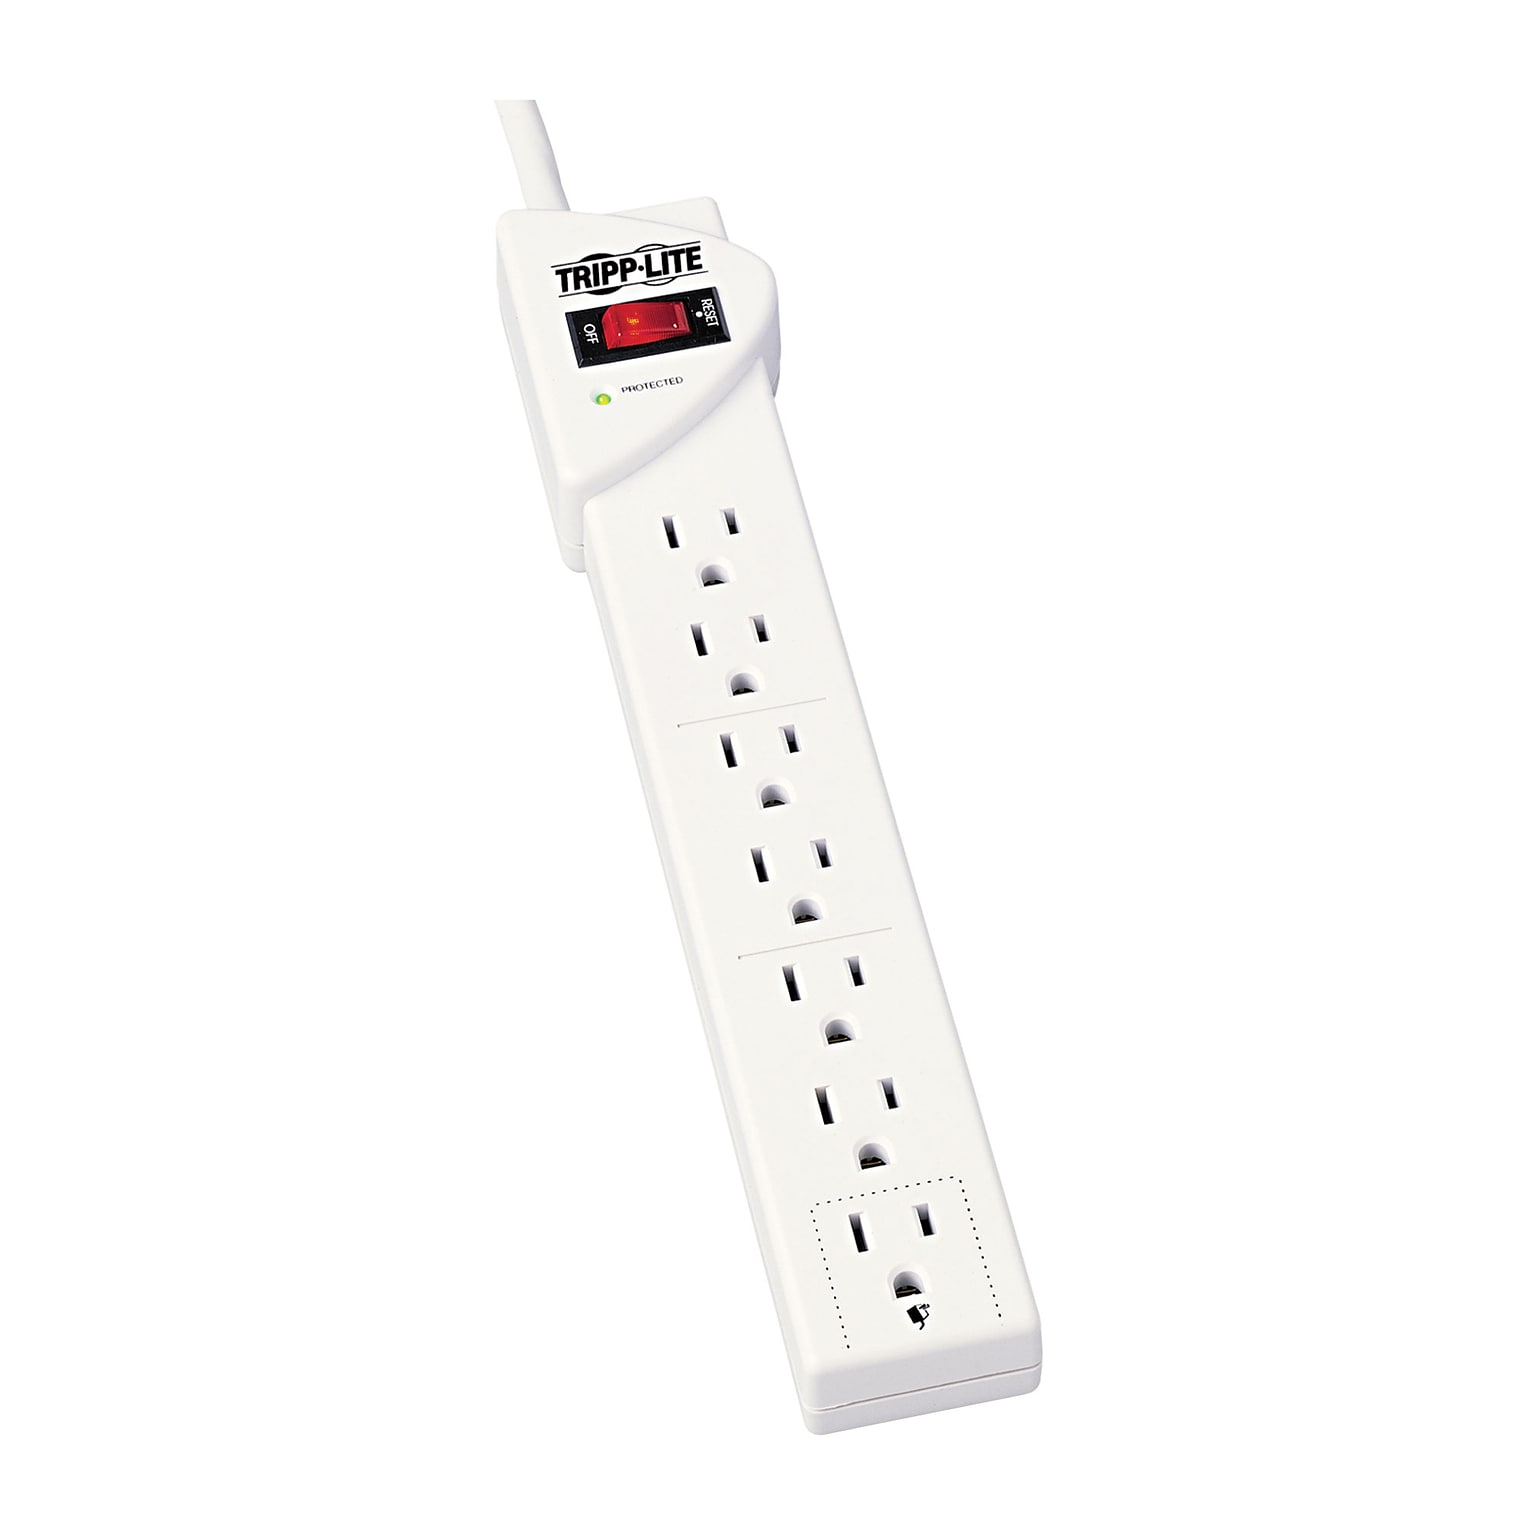 Tripp Lite® 7-Outlet Striker Surge Protector; White, 6ft. Cord, 1,080 Joules